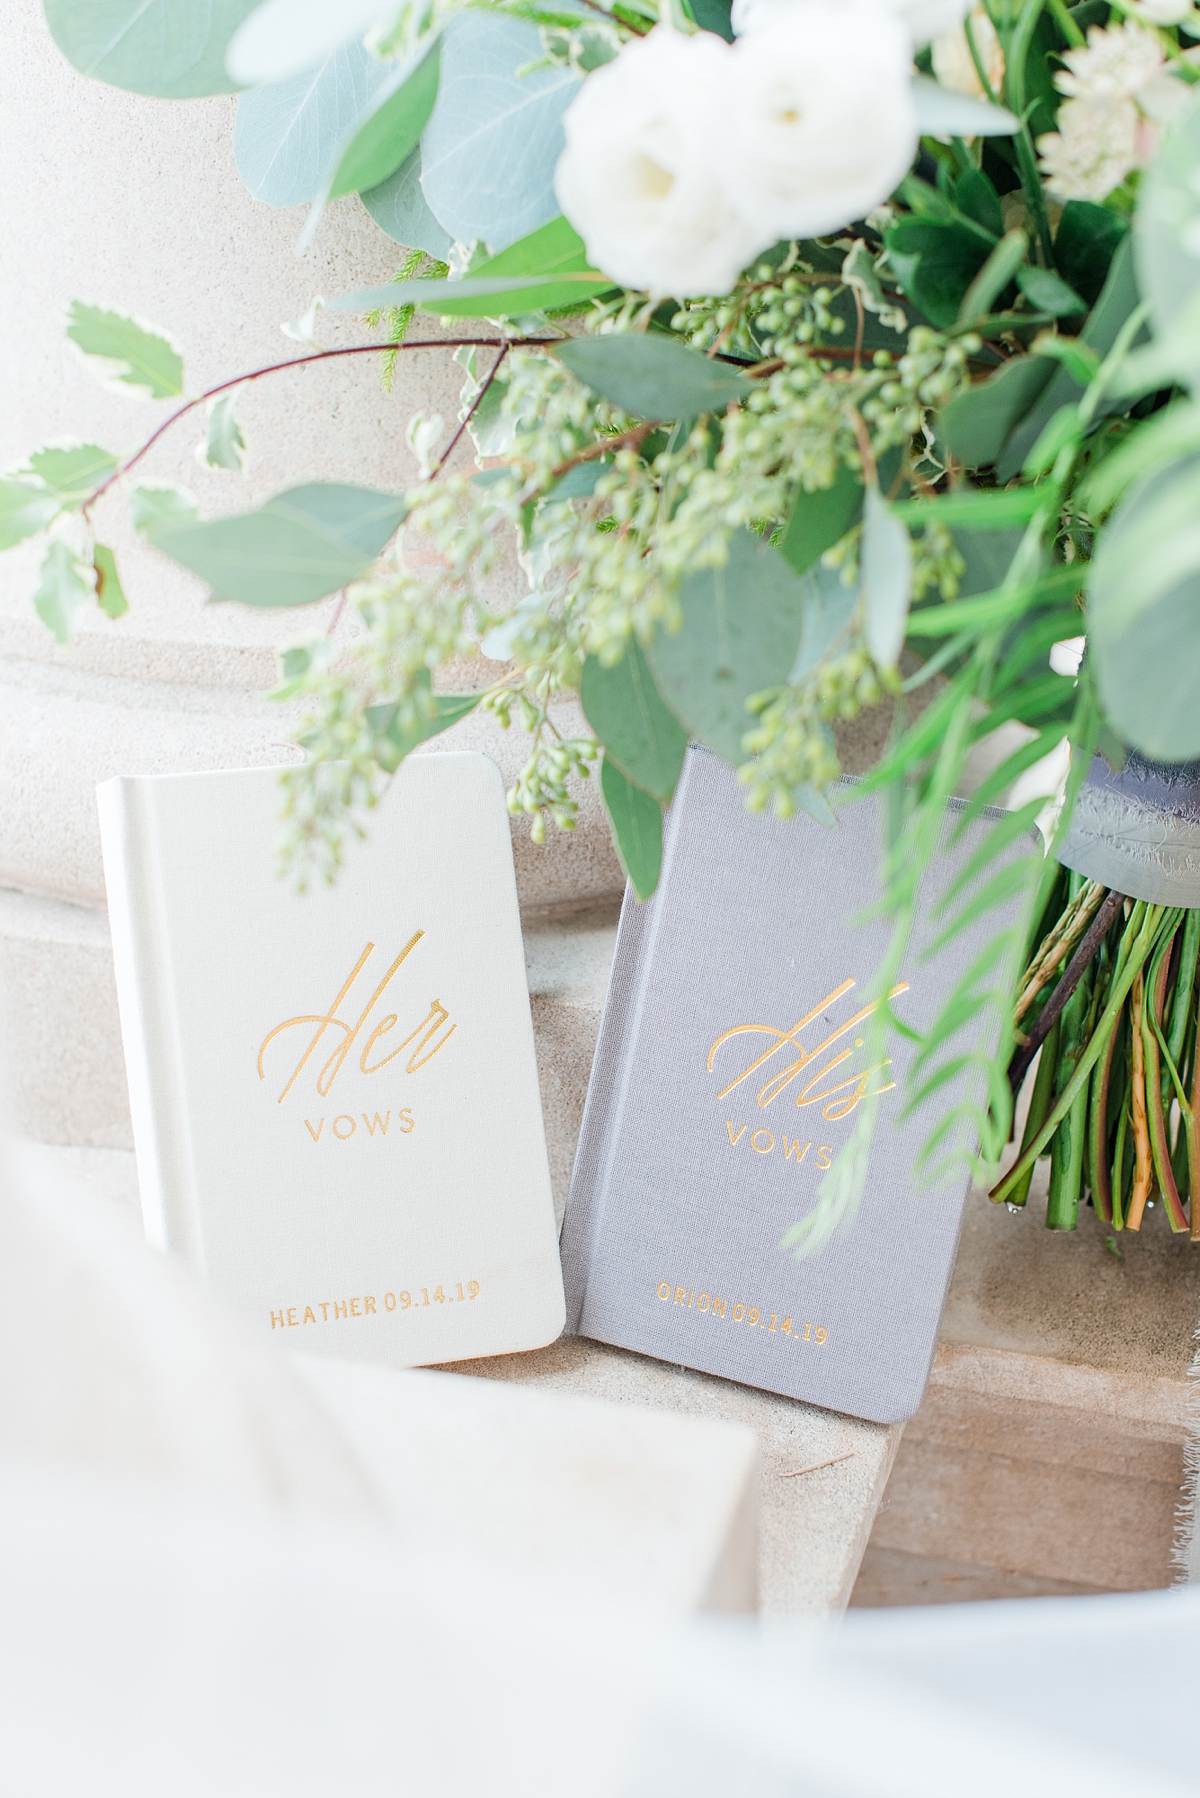 Bridal Details of Vow Books and Rings at a Timeless Grace Estate Winery Wedding. Wedding Photography by Richmond Wedding Photographer Kailey Brianne Photography.